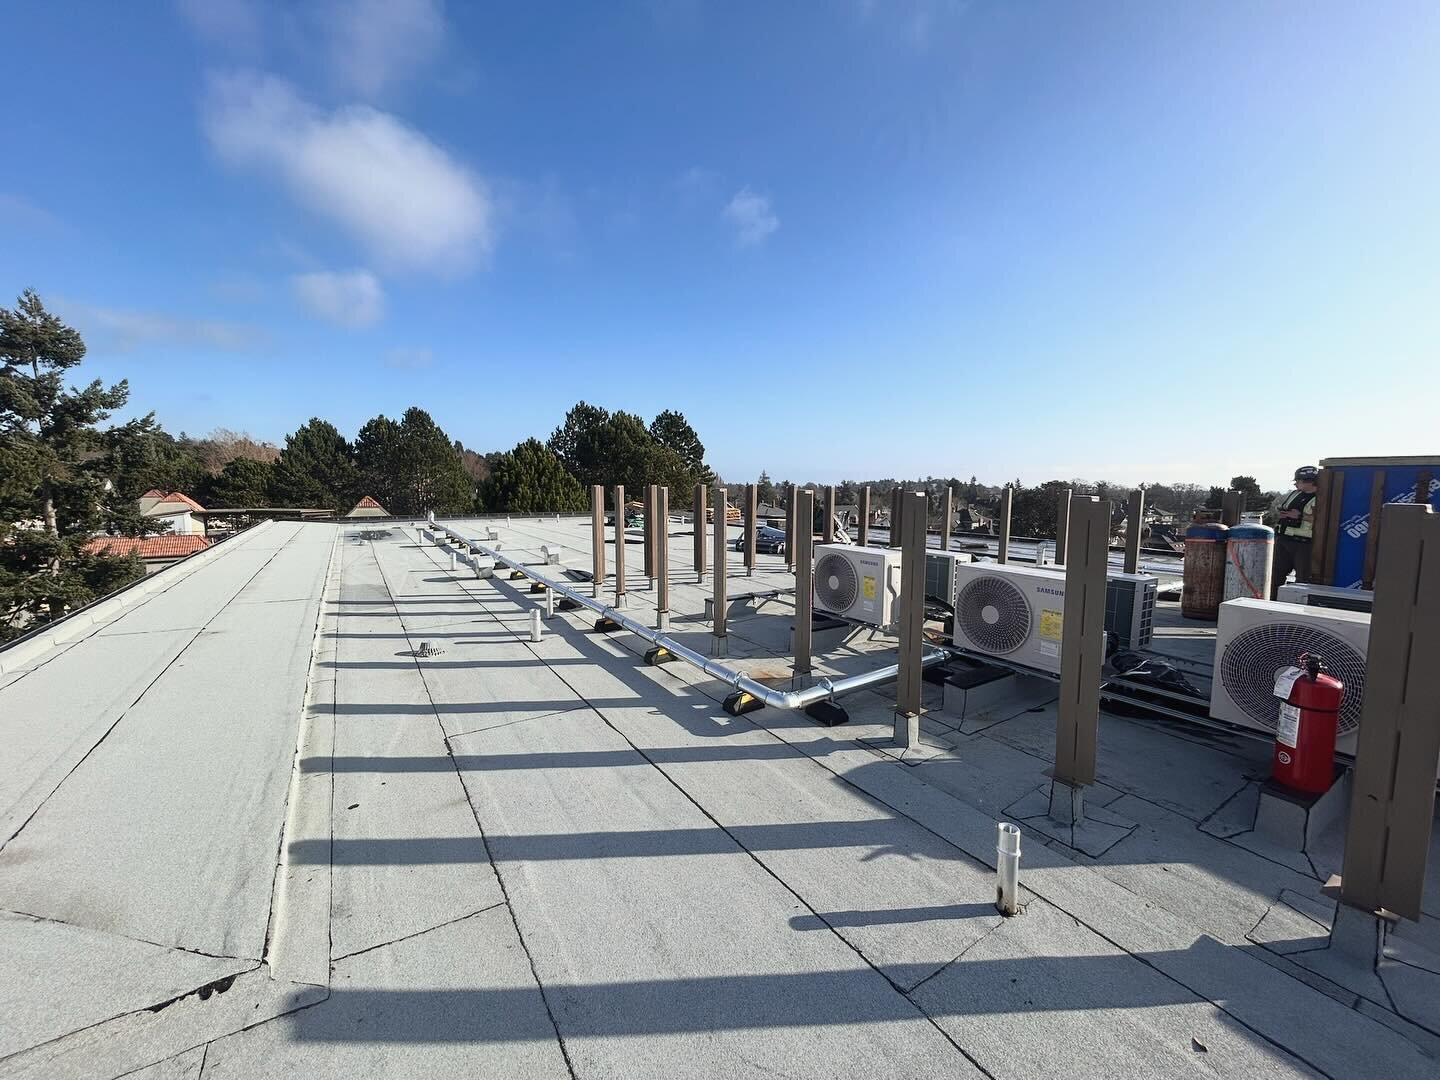 Finally getting some of that Victoria sunshine😍

Finishing up the pipe wrap on this roof top, and being able to be in a t-shirt is amazing. 

Cannot wait for this to be the norm for the next ~6 months.